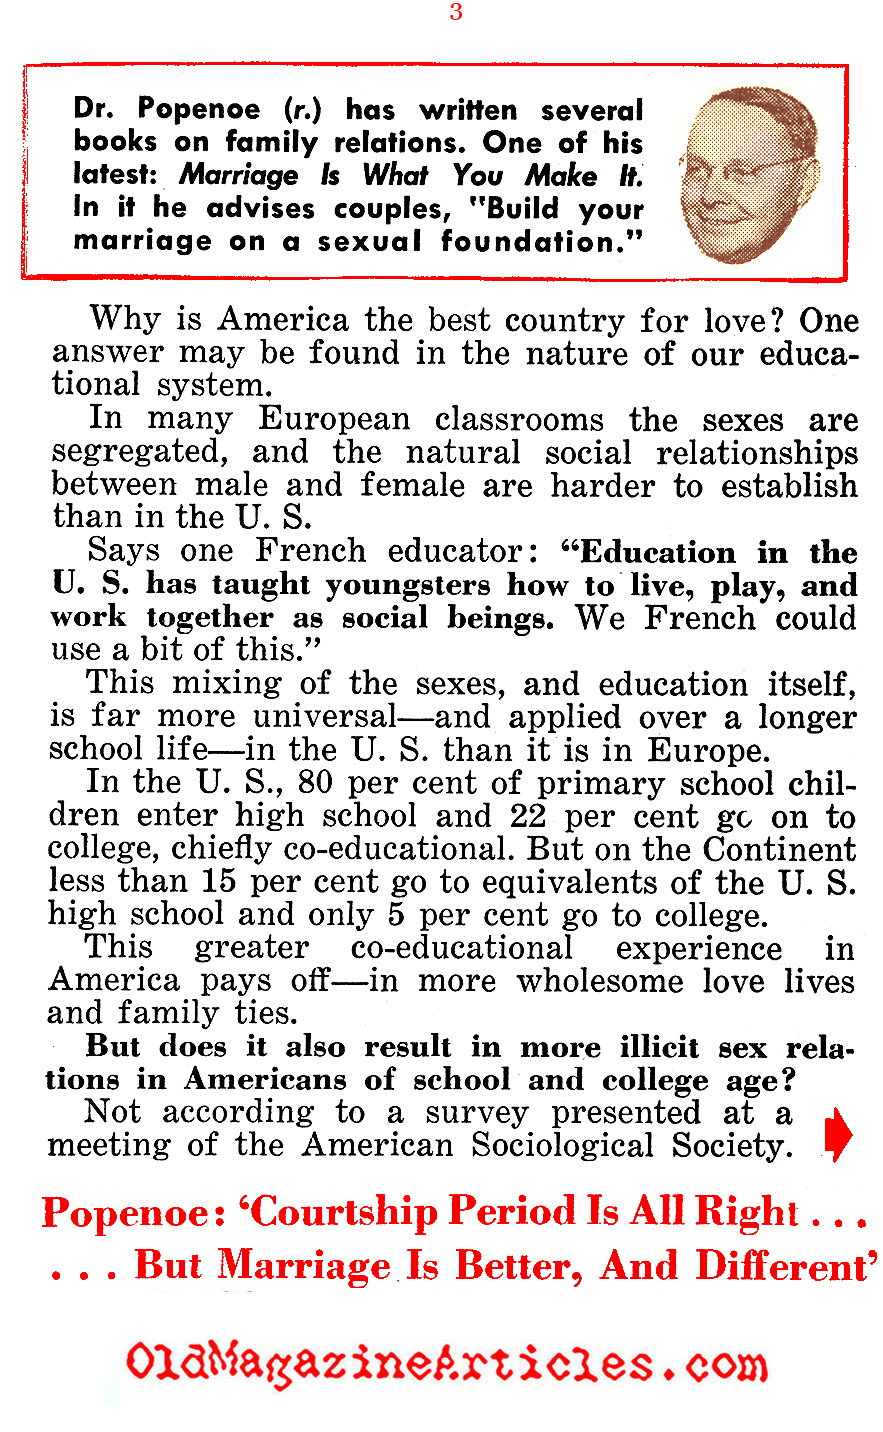 American Love is Better (People Today Magazine, 1955)